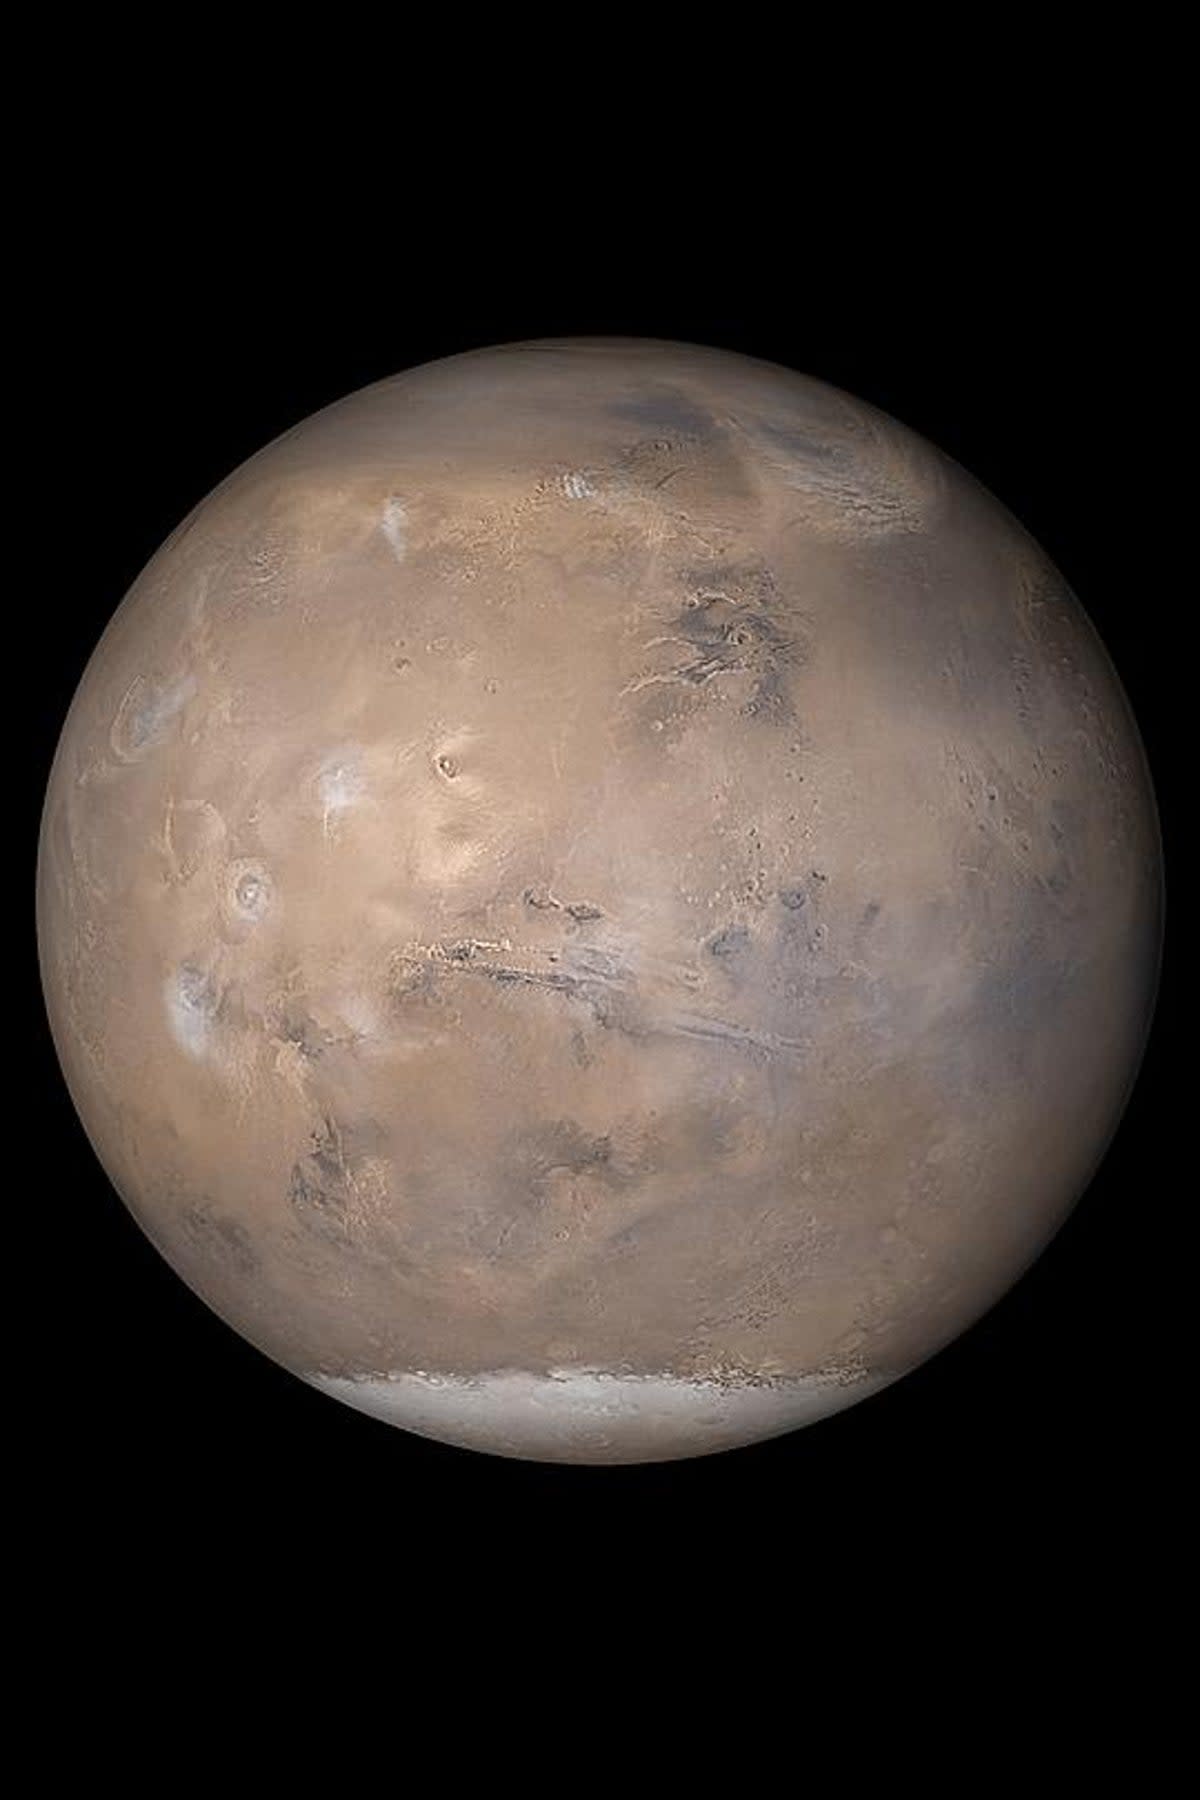 Mars as seen from space (Nasa)